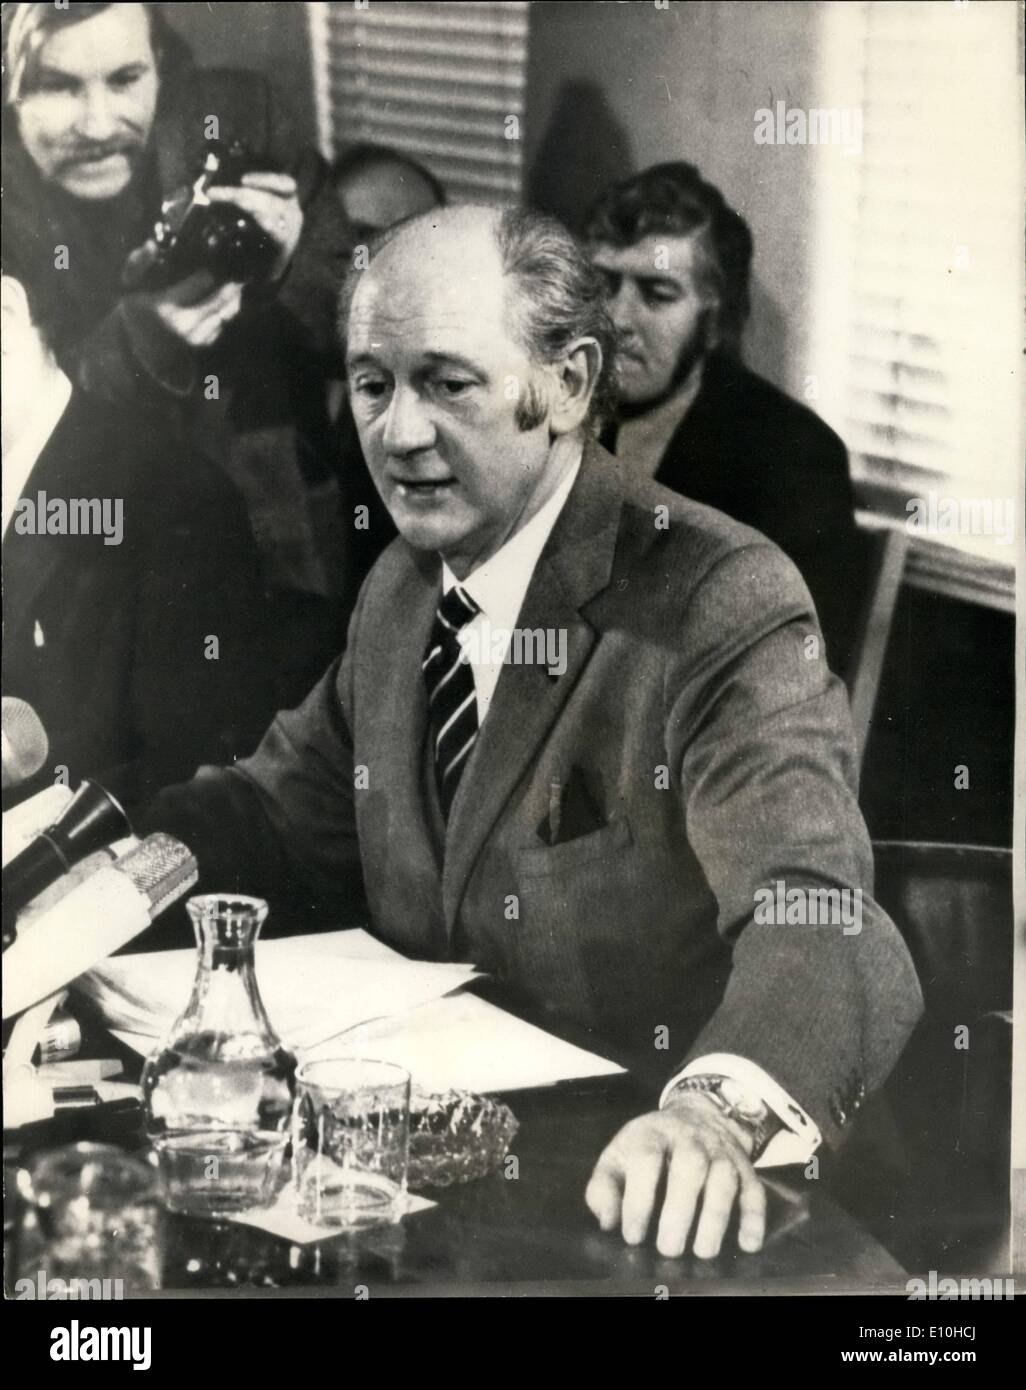 Feb. 02, 1973 - Eire General Election Polling takes place tomorrow in the Eire General Election Photo Shows: Mr. Jack Lynch, the Eire Prime Minister, pictured during today's Press Conference in Dublin Stock Photo